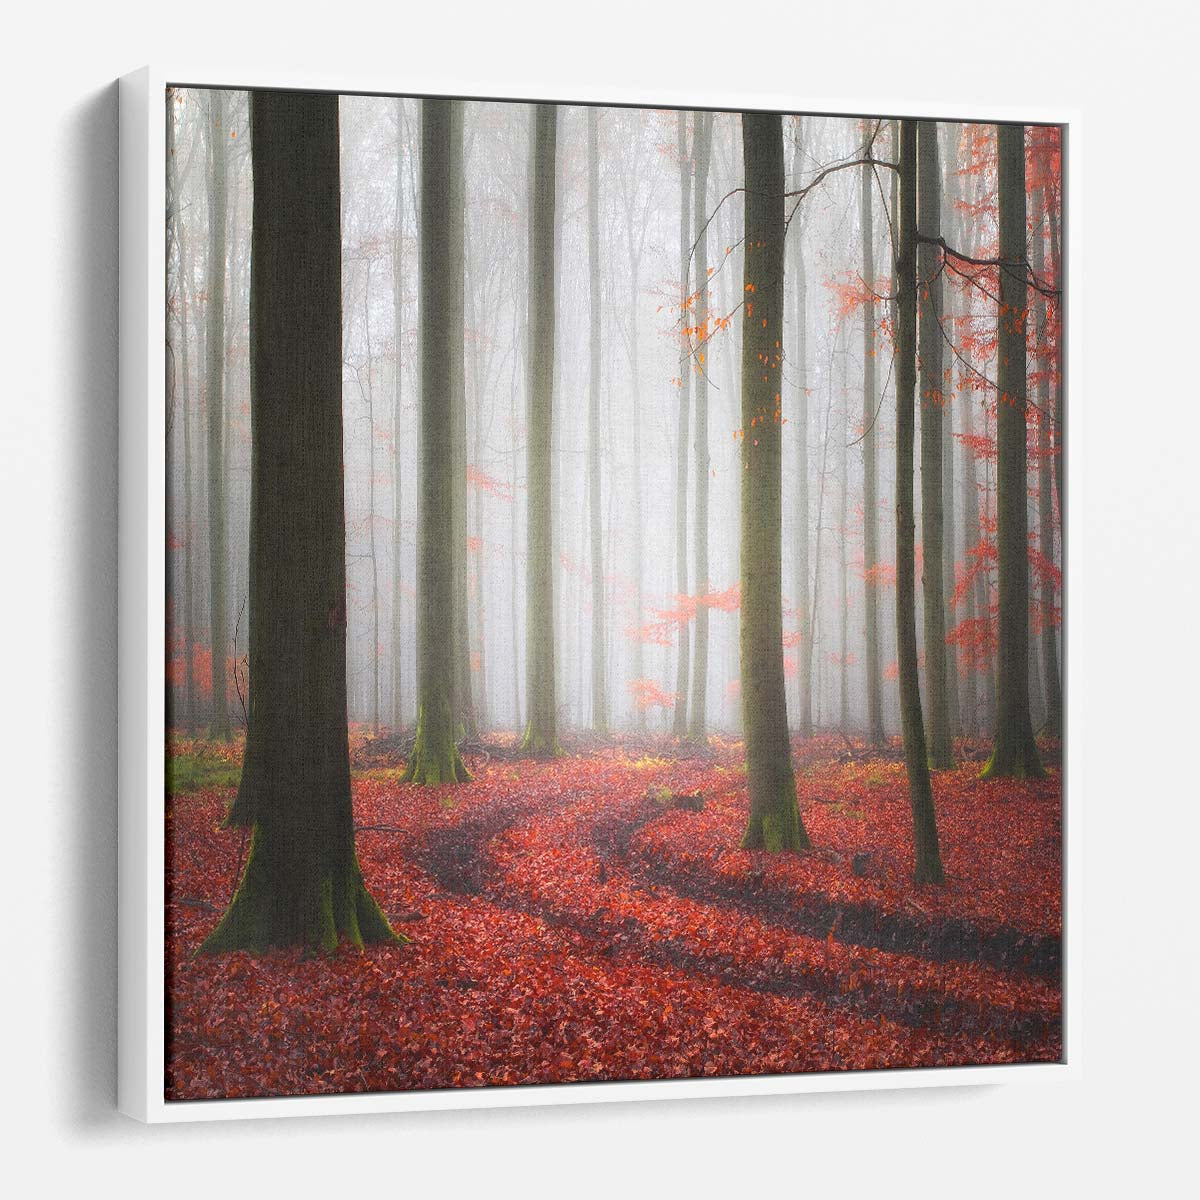 FogEnshrouded Red Autumn Forest Trail Landscape Photography Wall Art by Luxuriance Designs. Made in USA.